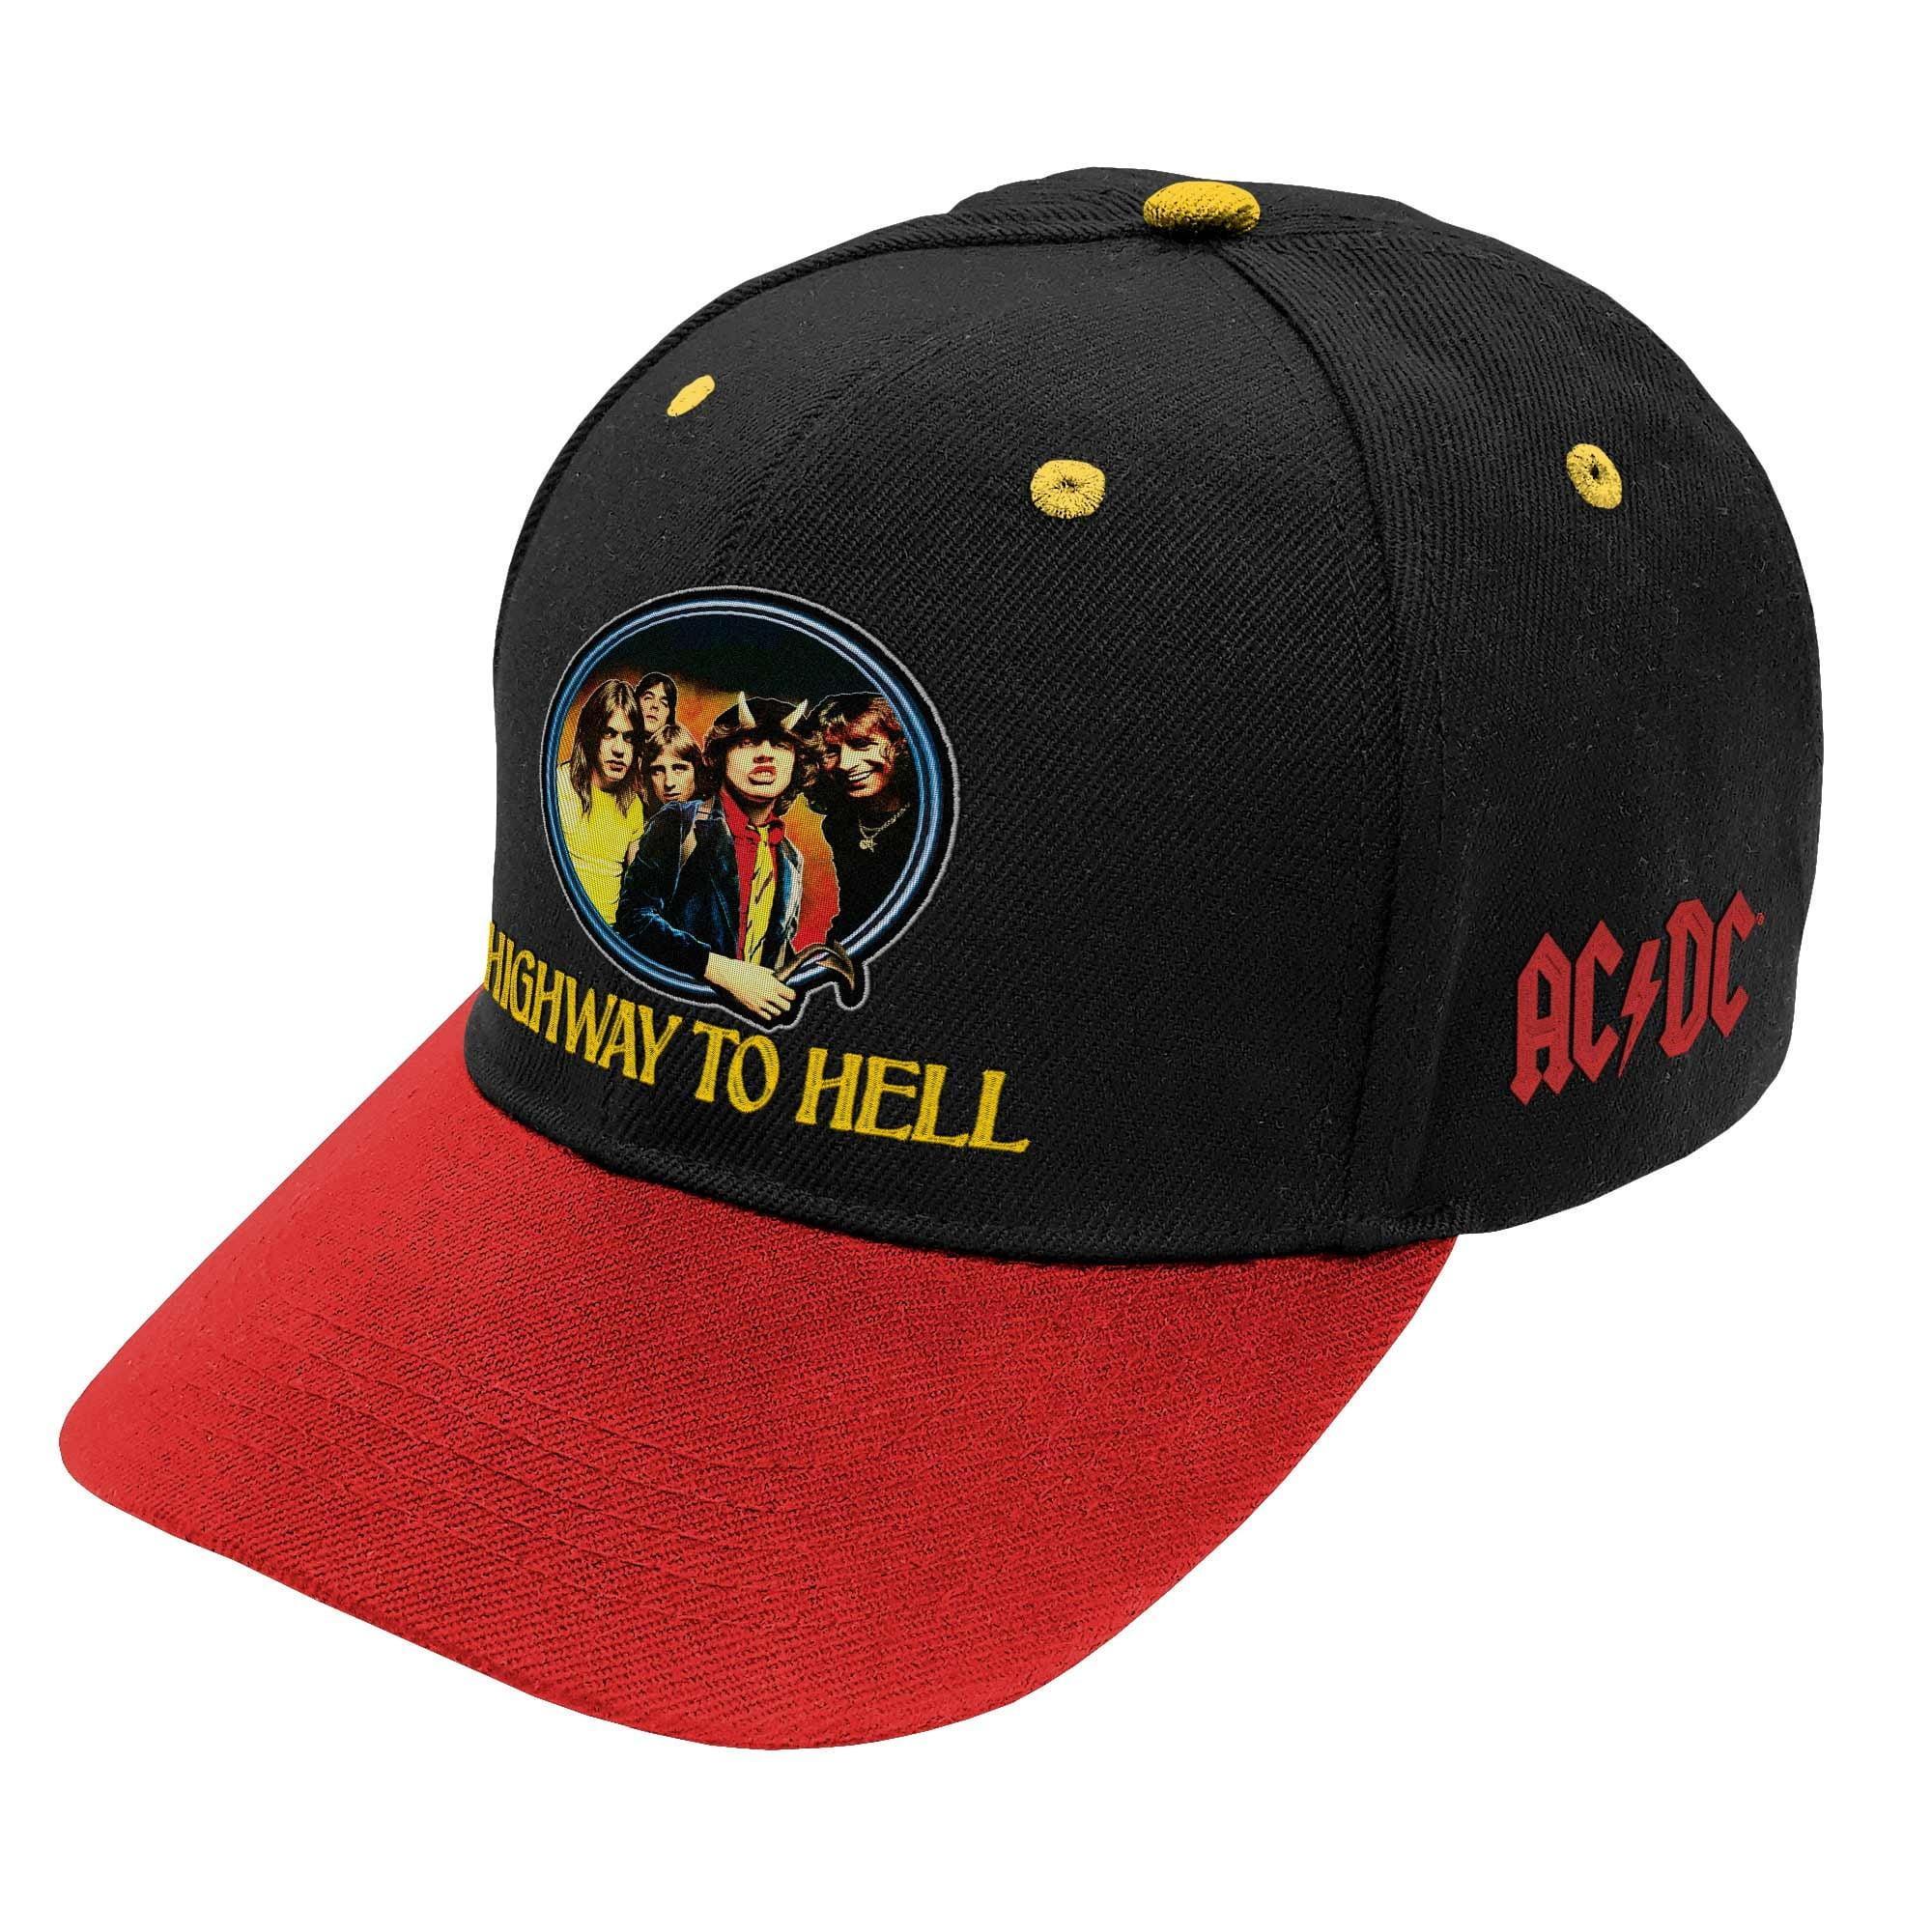 ACDC Highway To Hell Baseball Hat Cap